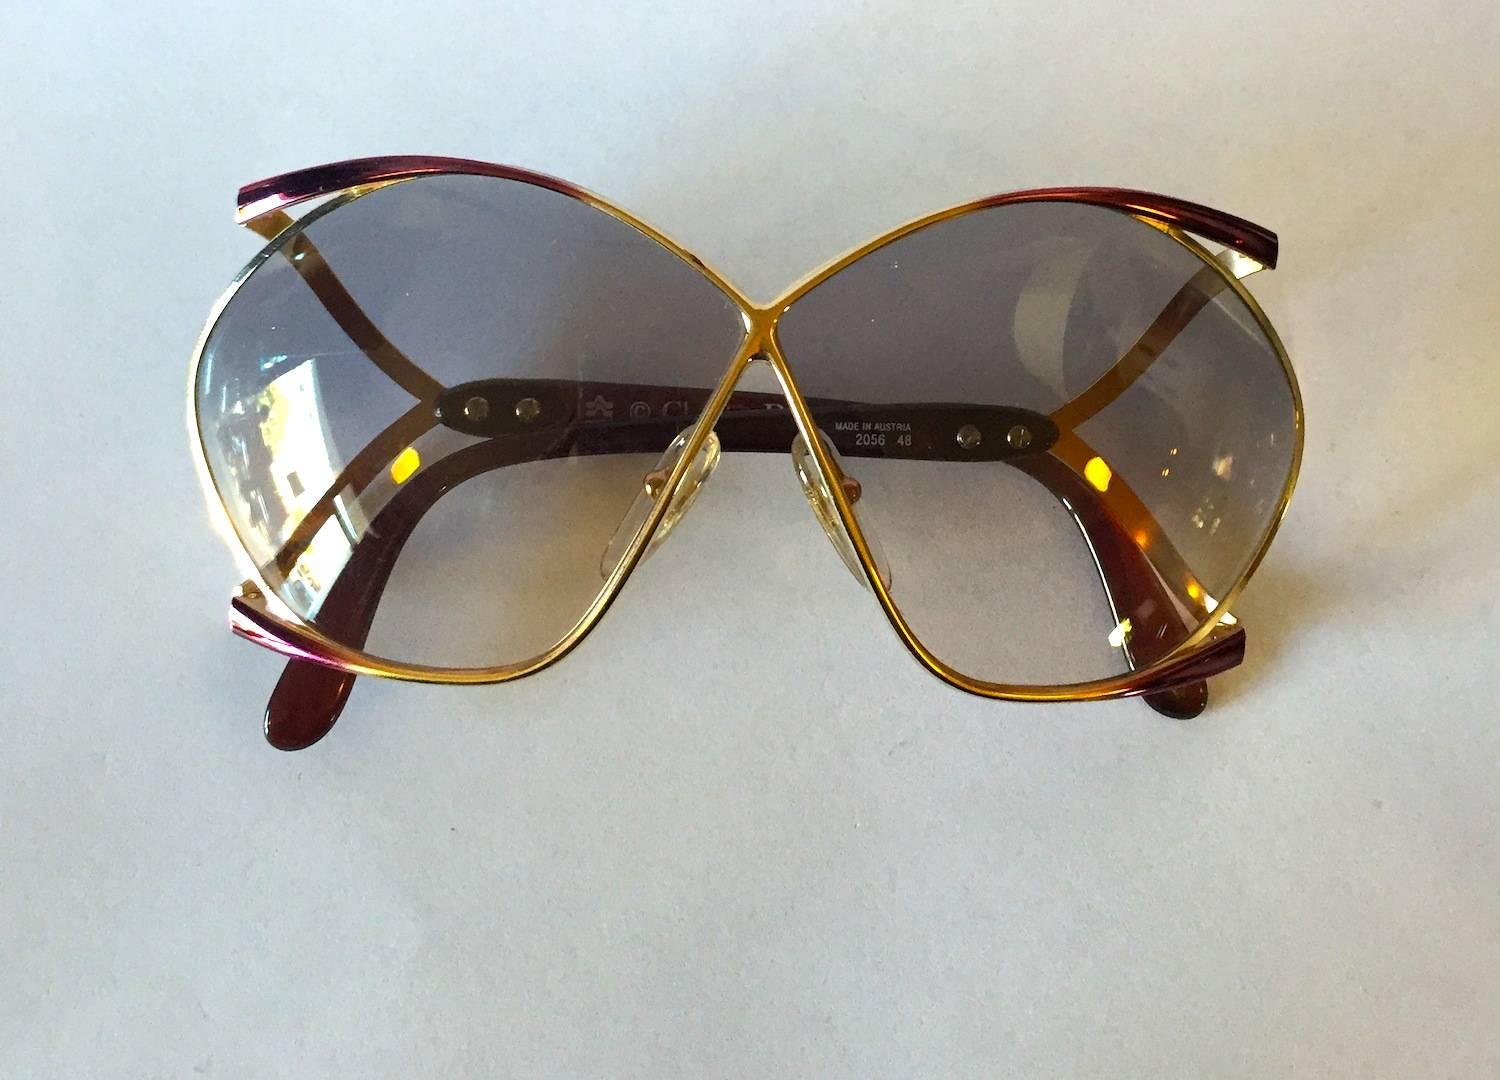 Christian Dior, 1970's metal large sunglasses gold and violet fade with new optical high quality gradient lenses, made in Austria. These sunglasses come from an optical boutique and will arrive perfectly adjusted and in a hard case and a cleaning